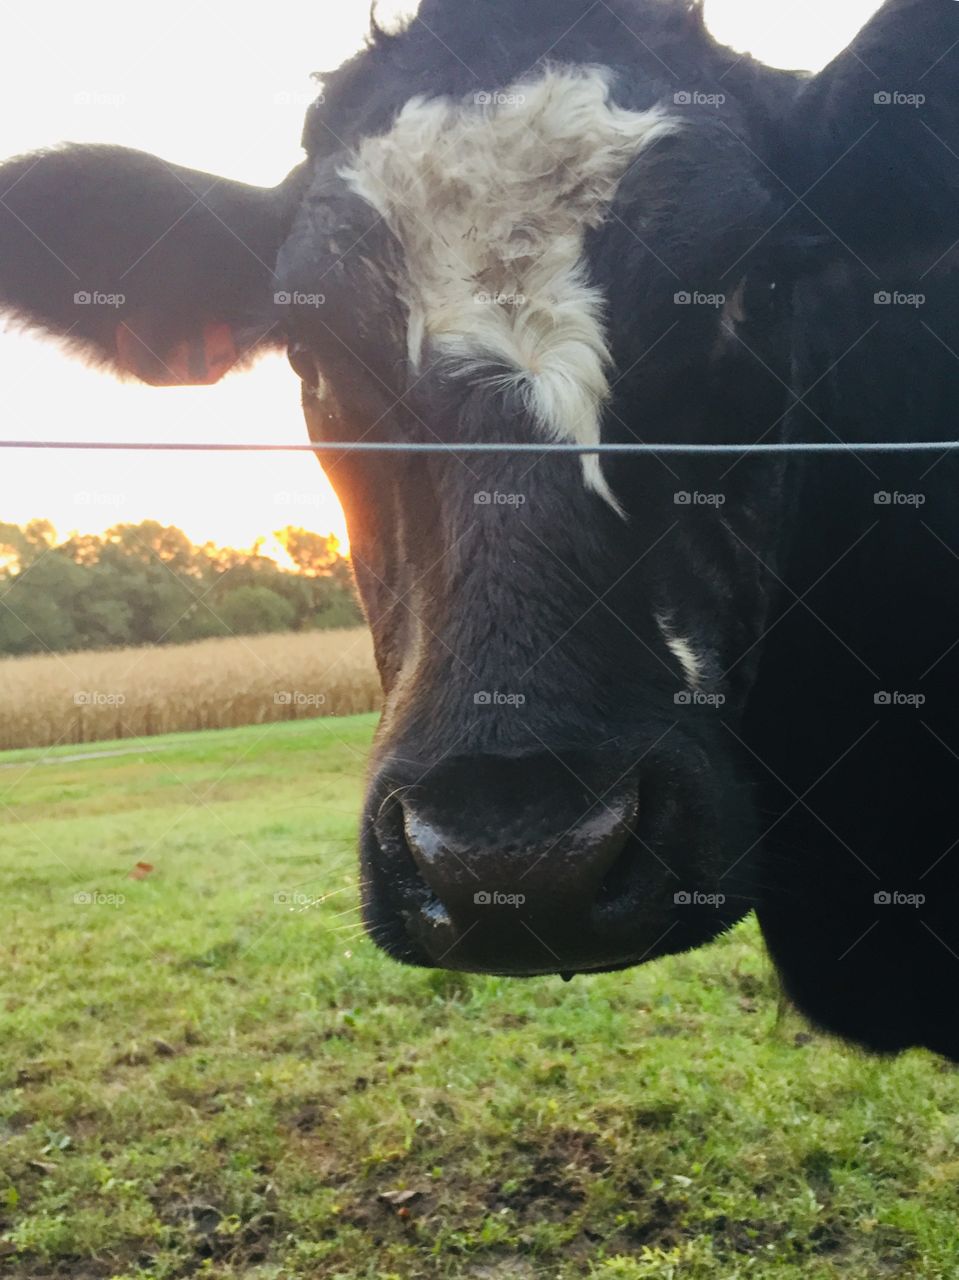 Closeup of a curious black steer with a white blaze looking over a hot wire fence against a blurred rural landscape, sunlight over the trees in the distance